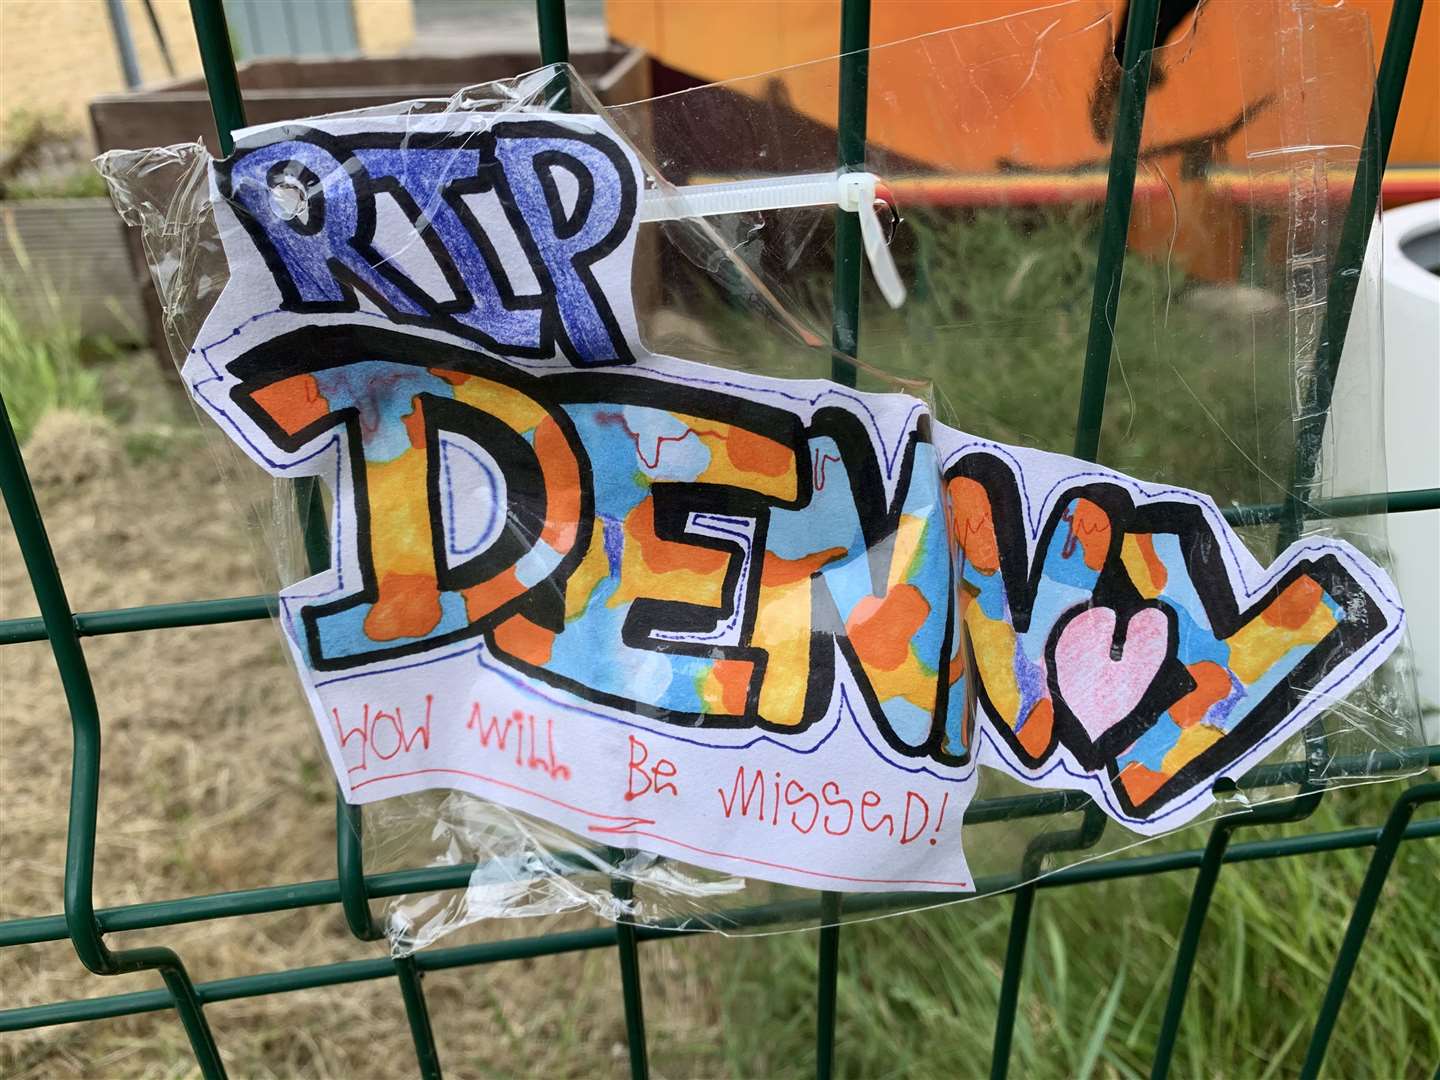 Artwork in Alex Denny's memory has been tied to the fence